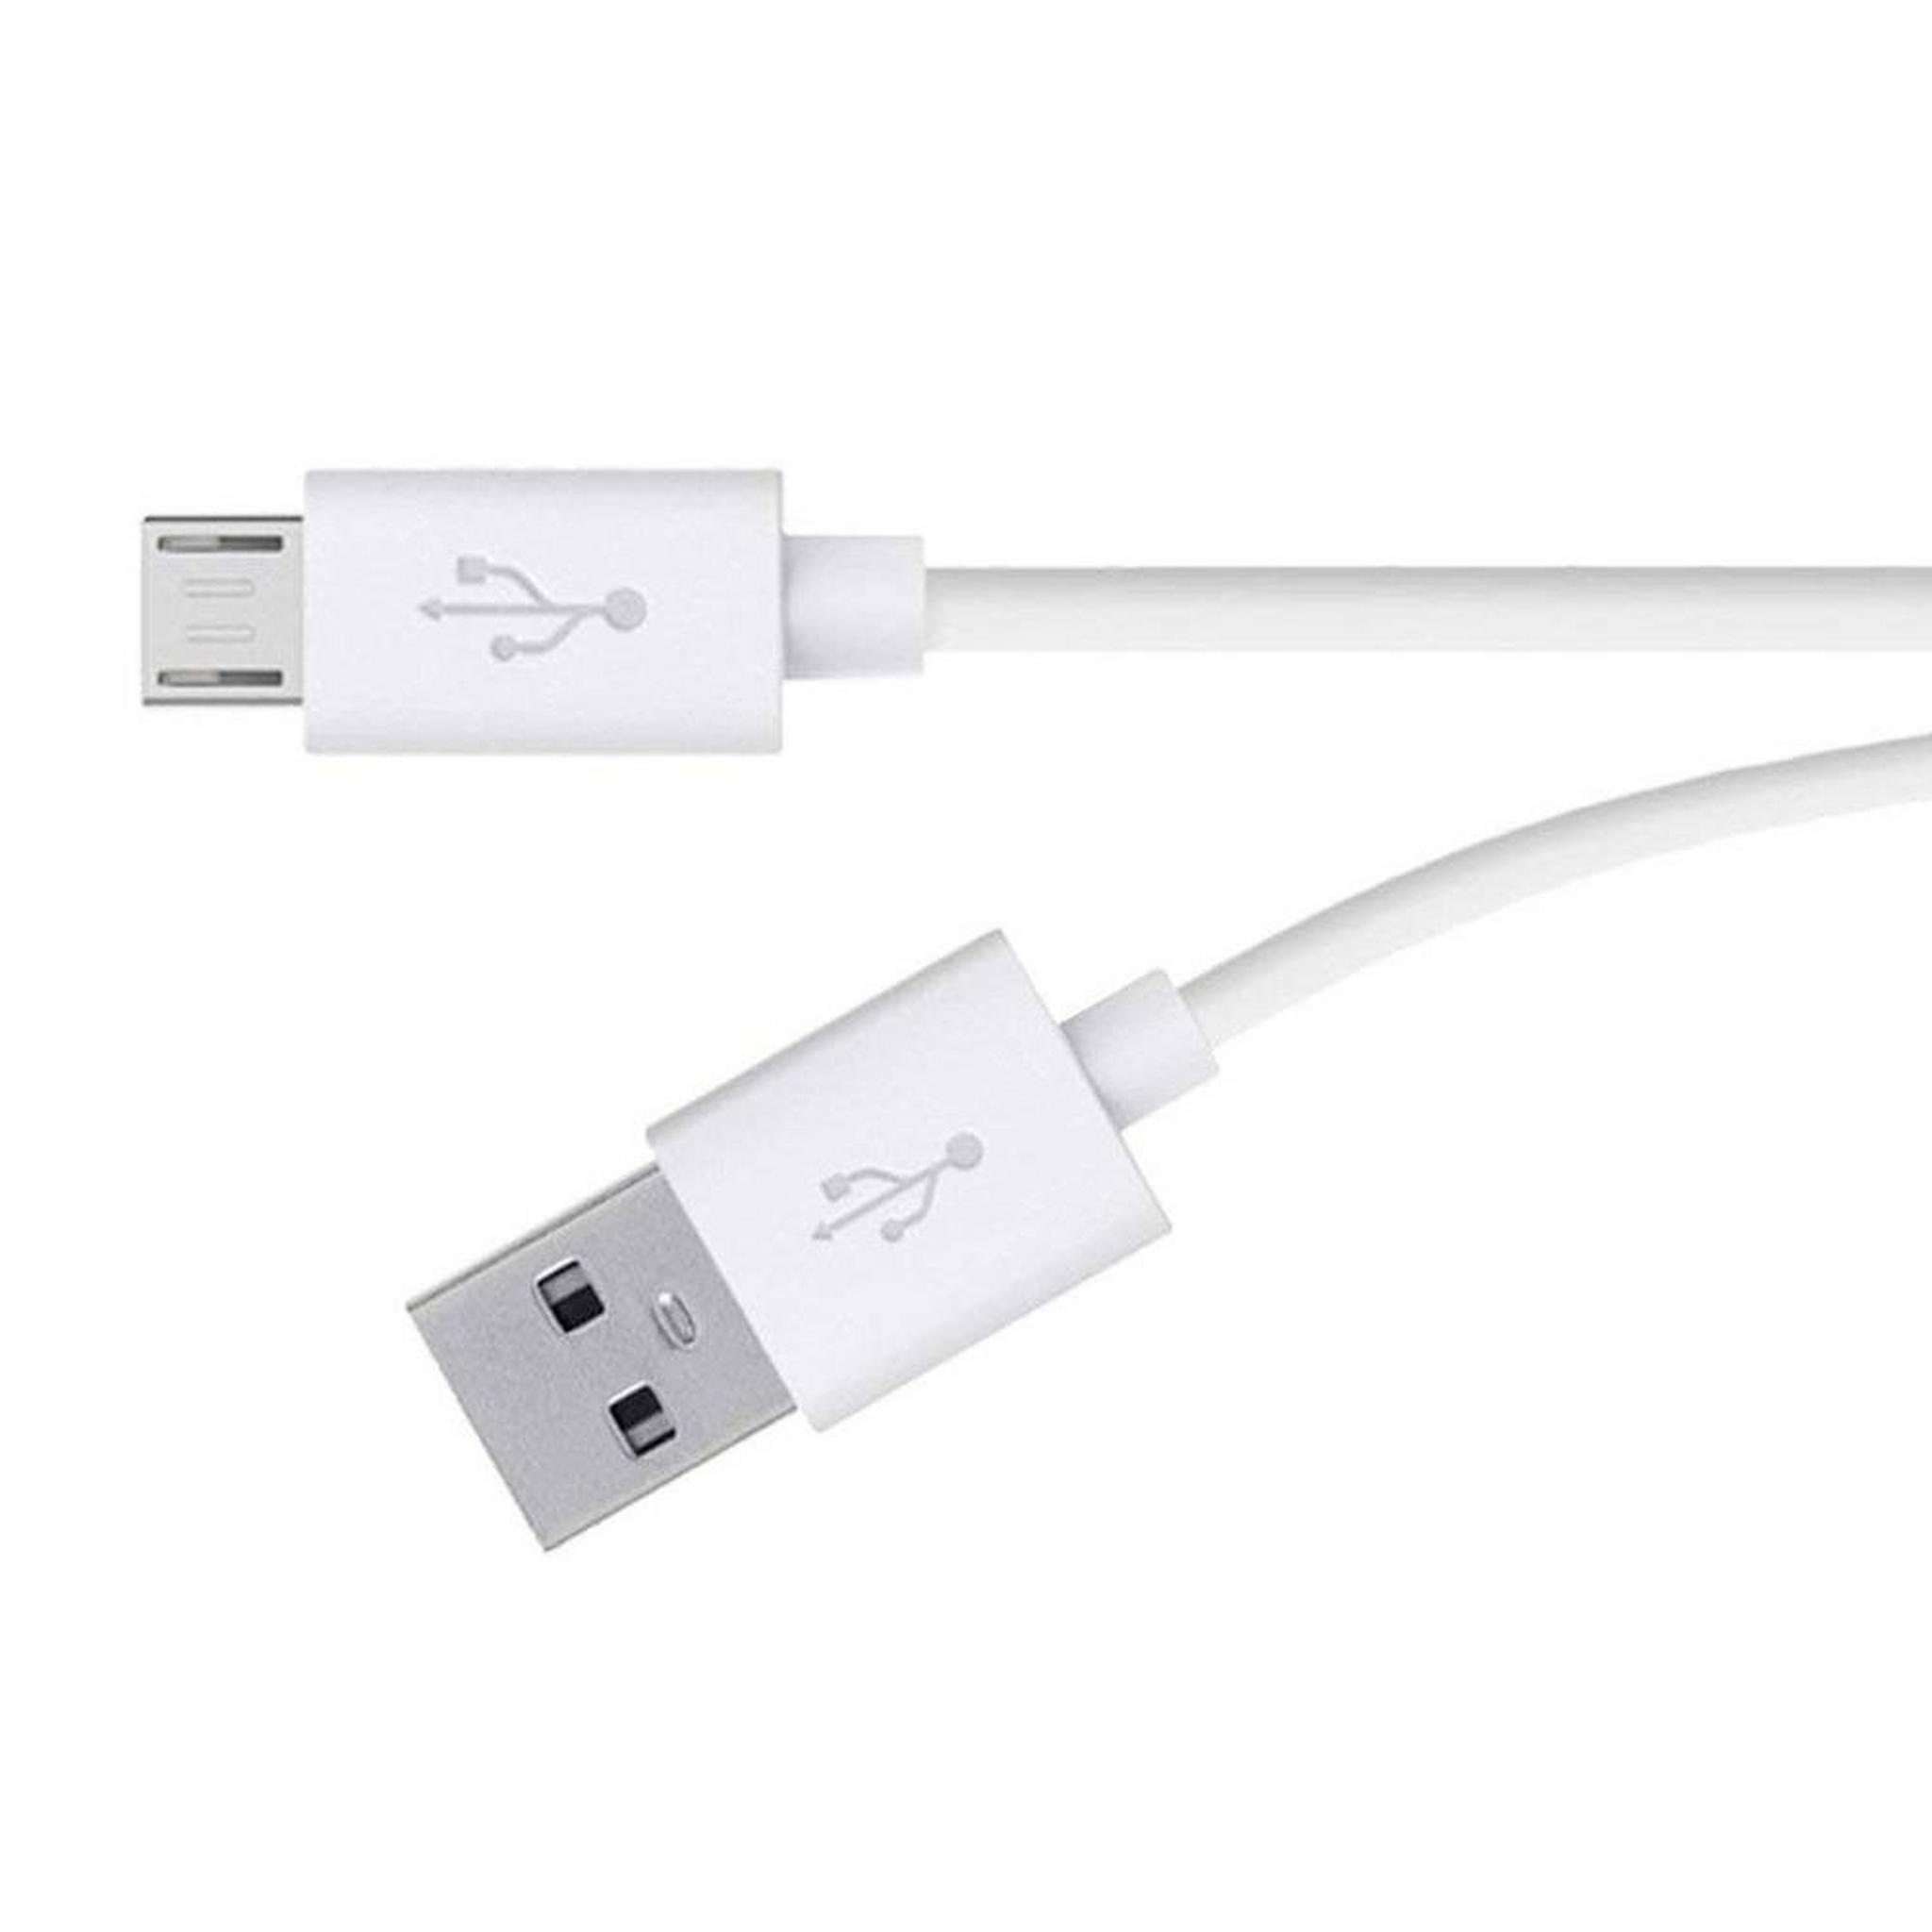 Belkin Mixit Micro USB Cable 2M - White